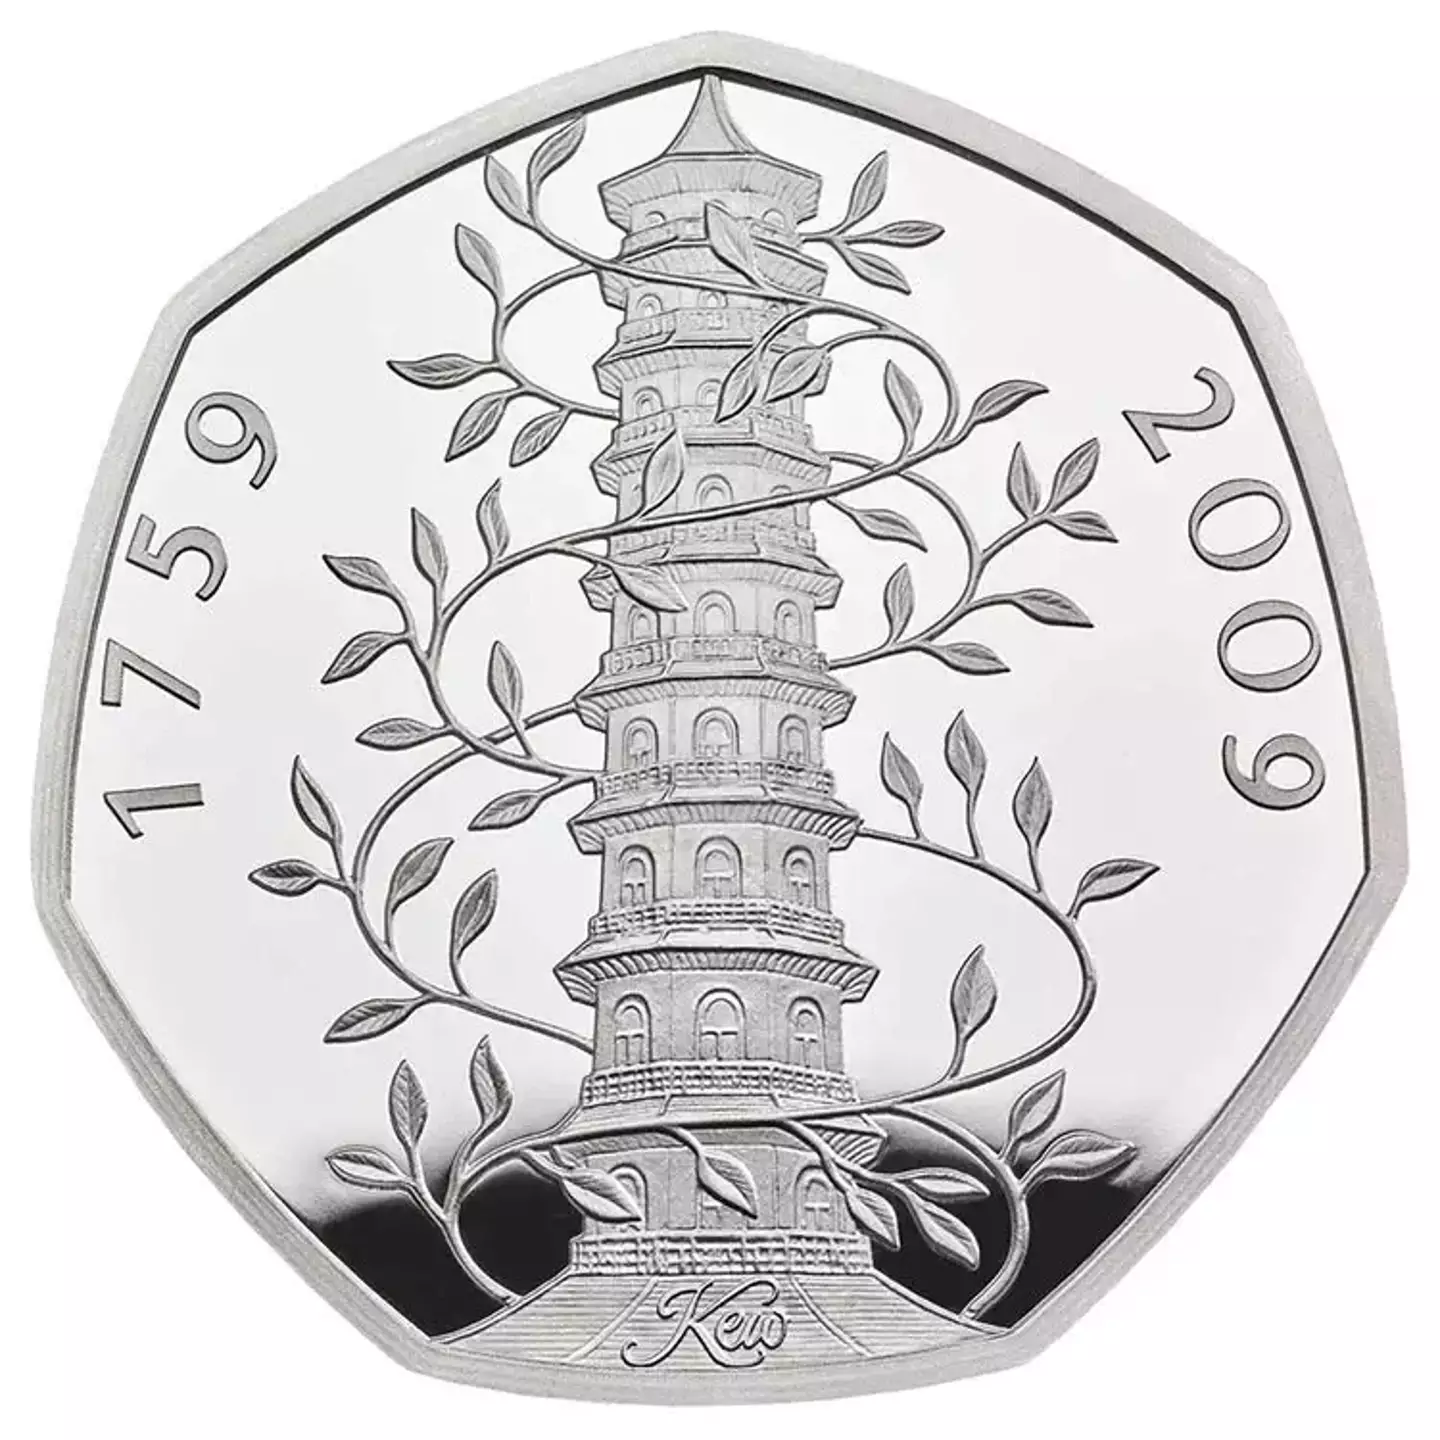 This 50p - released in 2009 - is a huge collector's item.